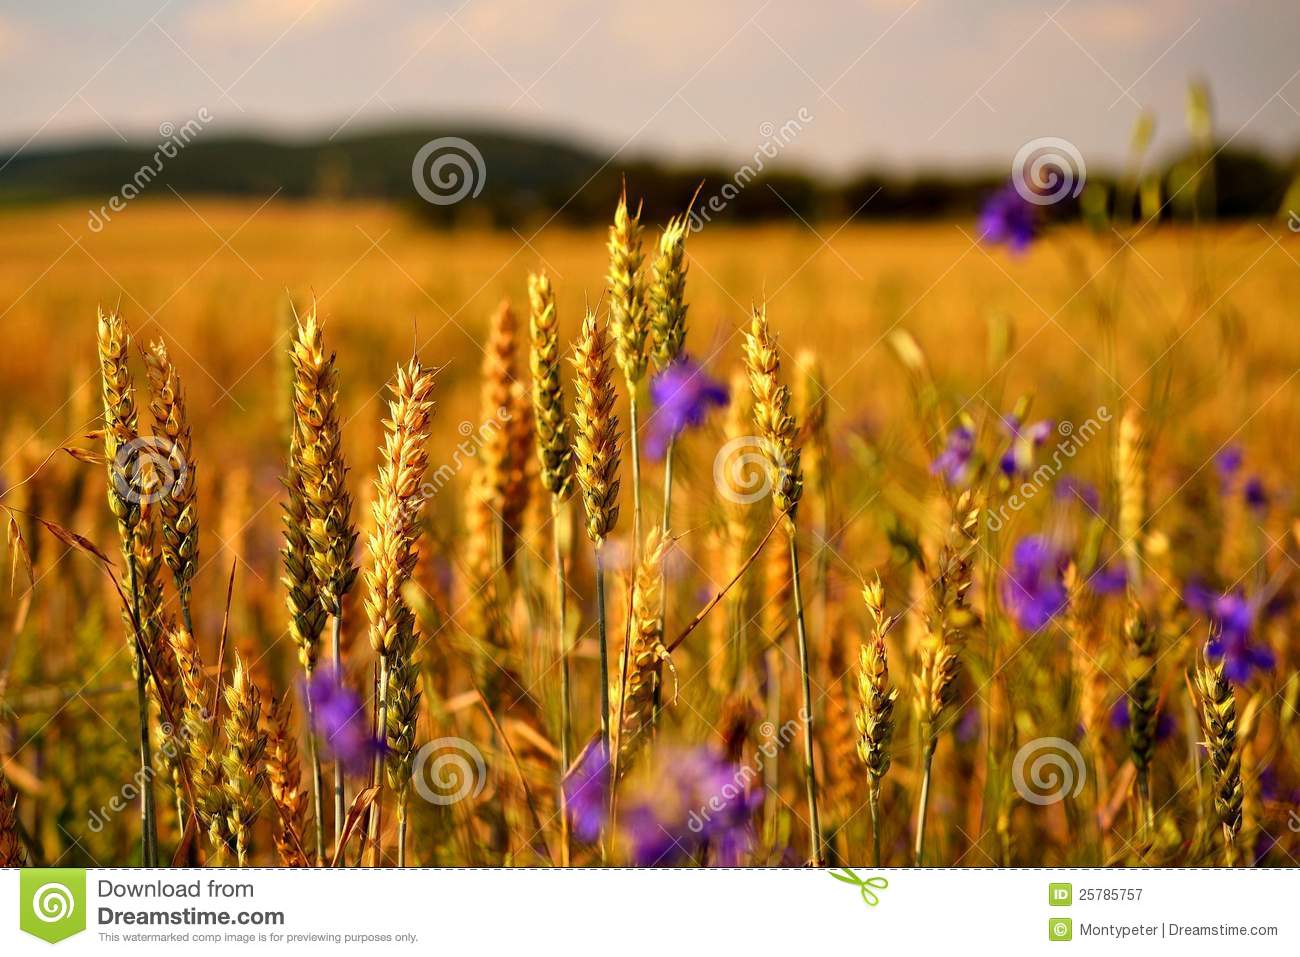 Harvest Time Royalty Free Stock Photography   Image  25785757